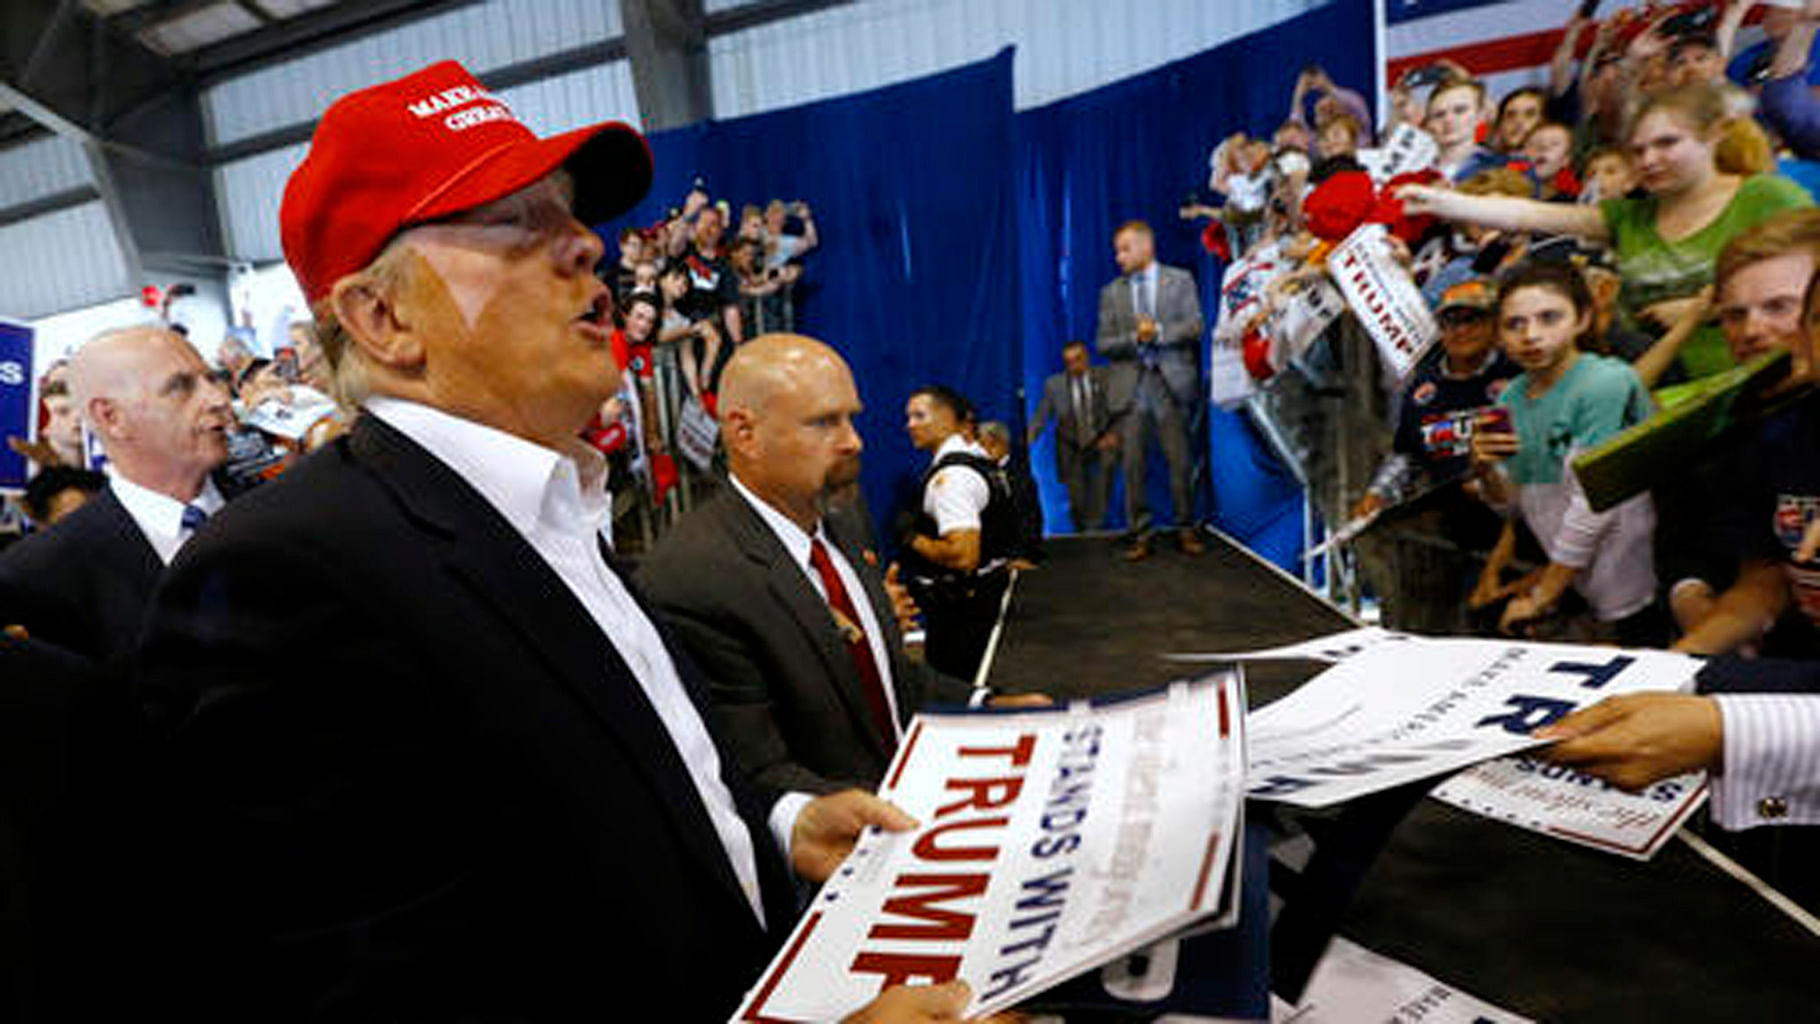 Donald Trump addresses concerns about outsourcing of jobs at a campaign rally in Delaware, US. (Photo: AP)